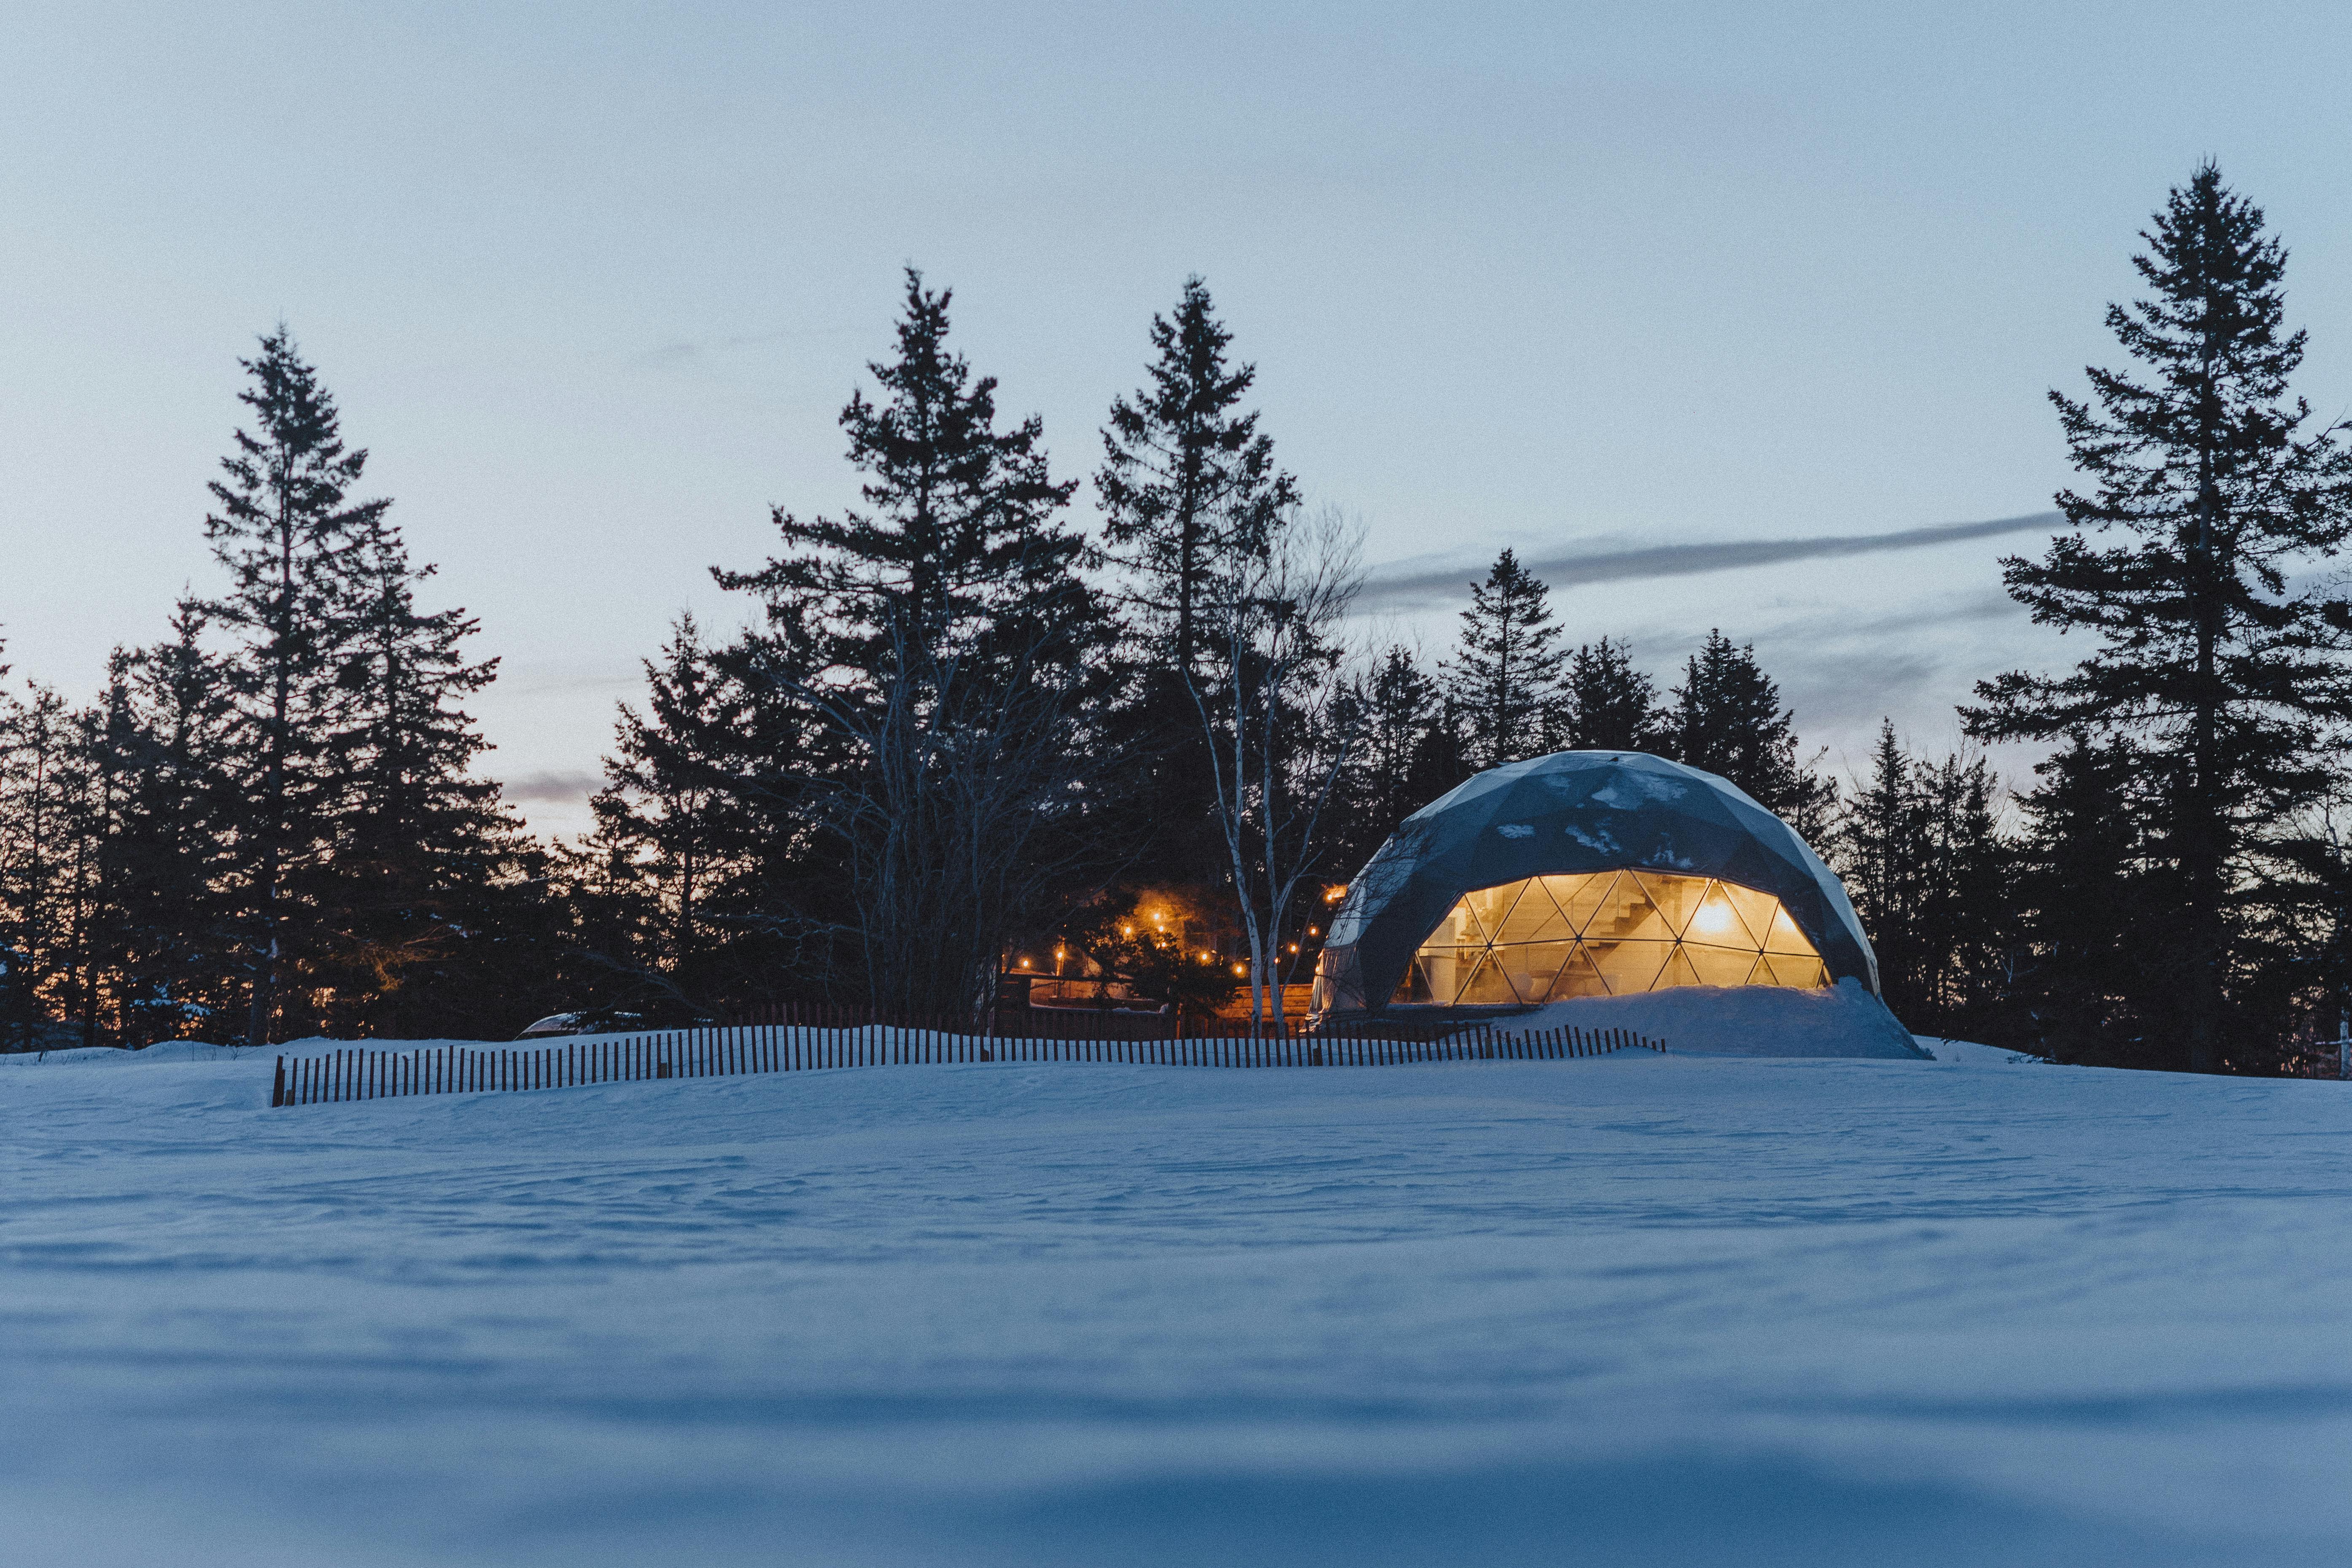 The domed accommodations at Cielo Maritime Glamping resort are known as 